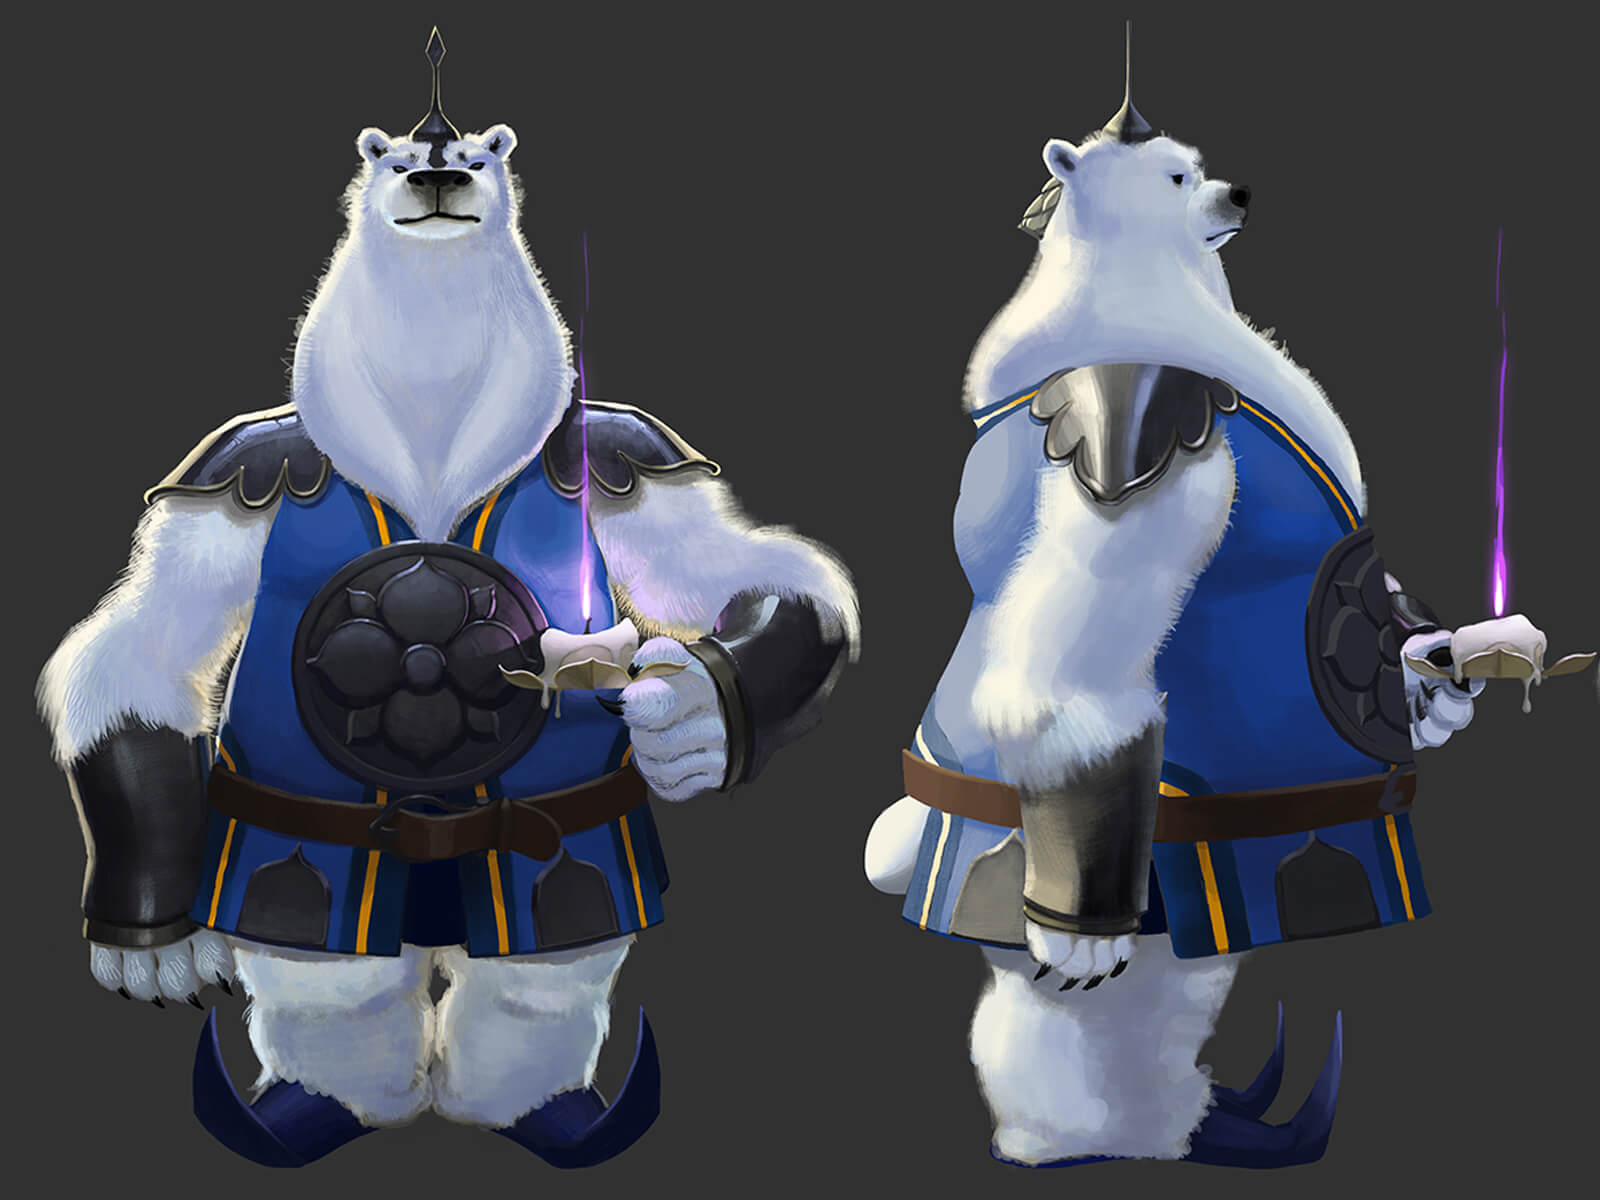 digital painting of a polar bear character standing upright in a soldier's uniform carrying a lit candle